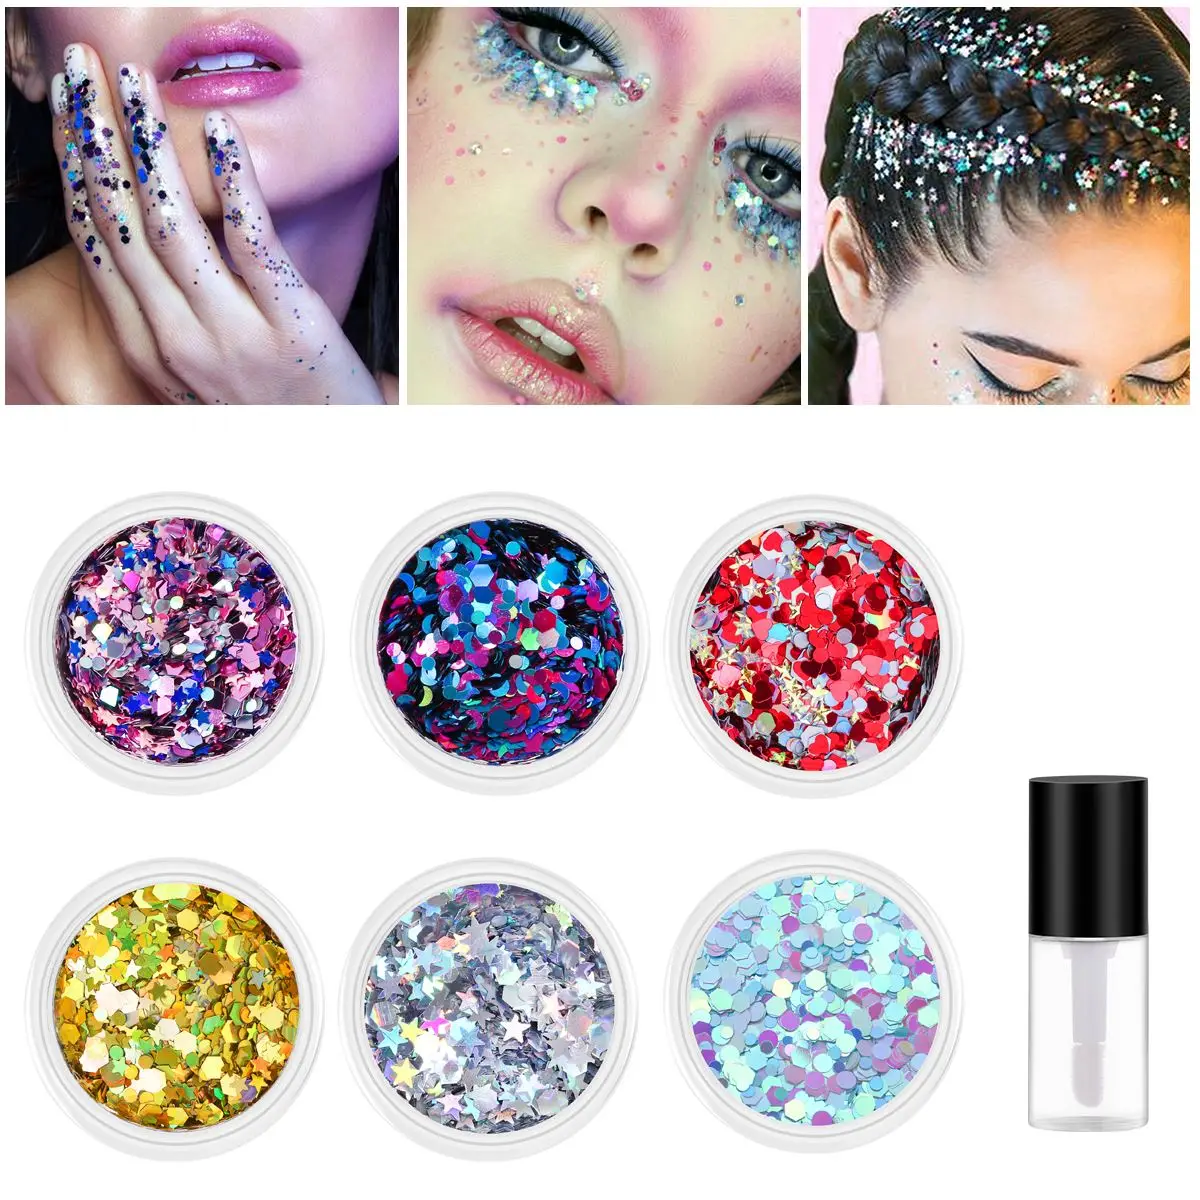 

NICEAUTY 6pcs Set Glitter Powder Cosmetic Paillette 5g Sparkling Decoration Face Body Hair Nails Make Up Supplies With 10g Glue